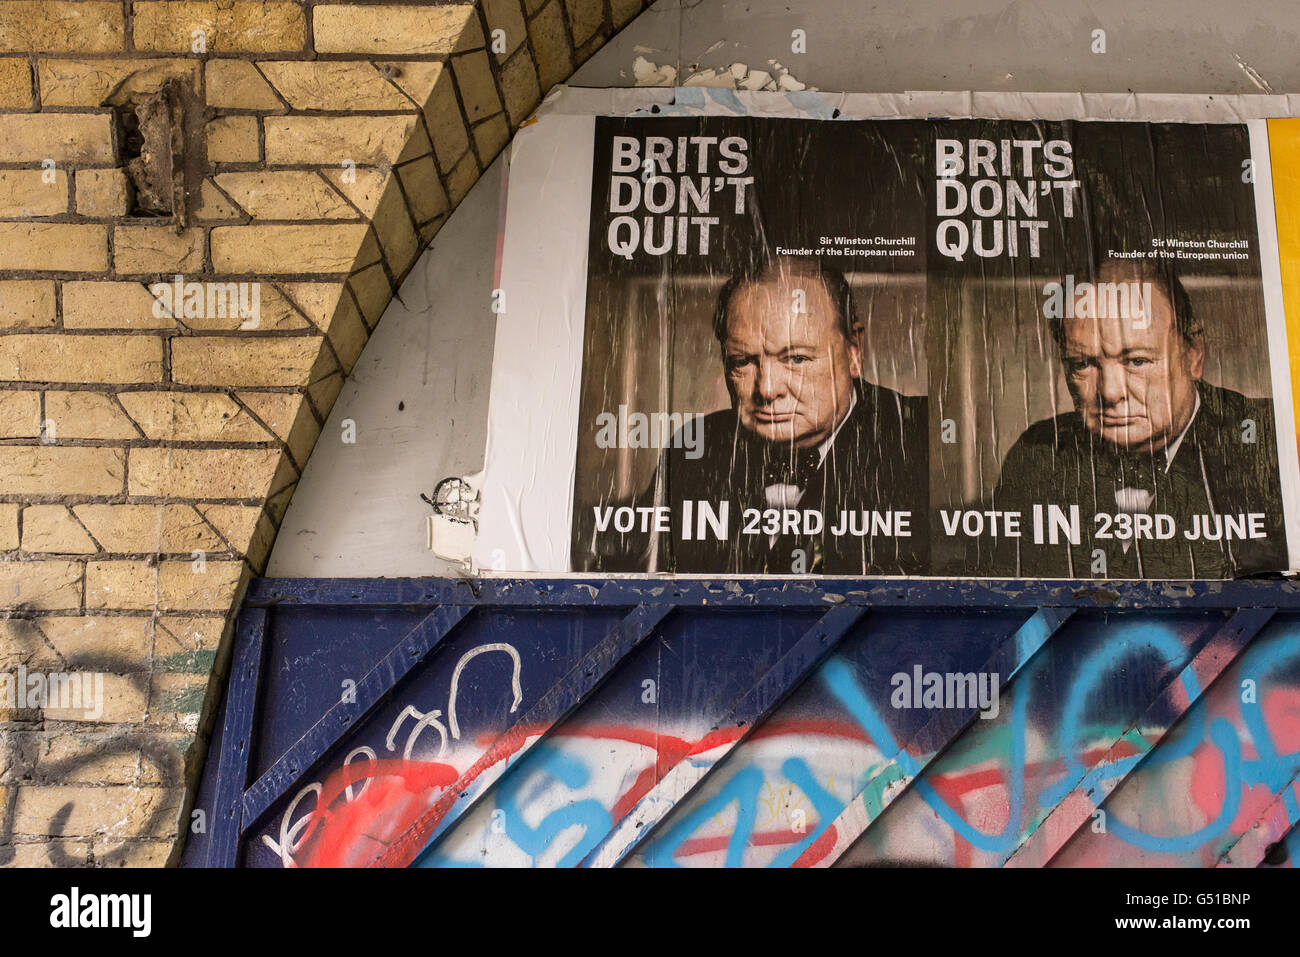 Poster in favor of a vote to remain in the European Union with Winston Churchill's face and the words 'Brits don't Quit'. Stock Photo